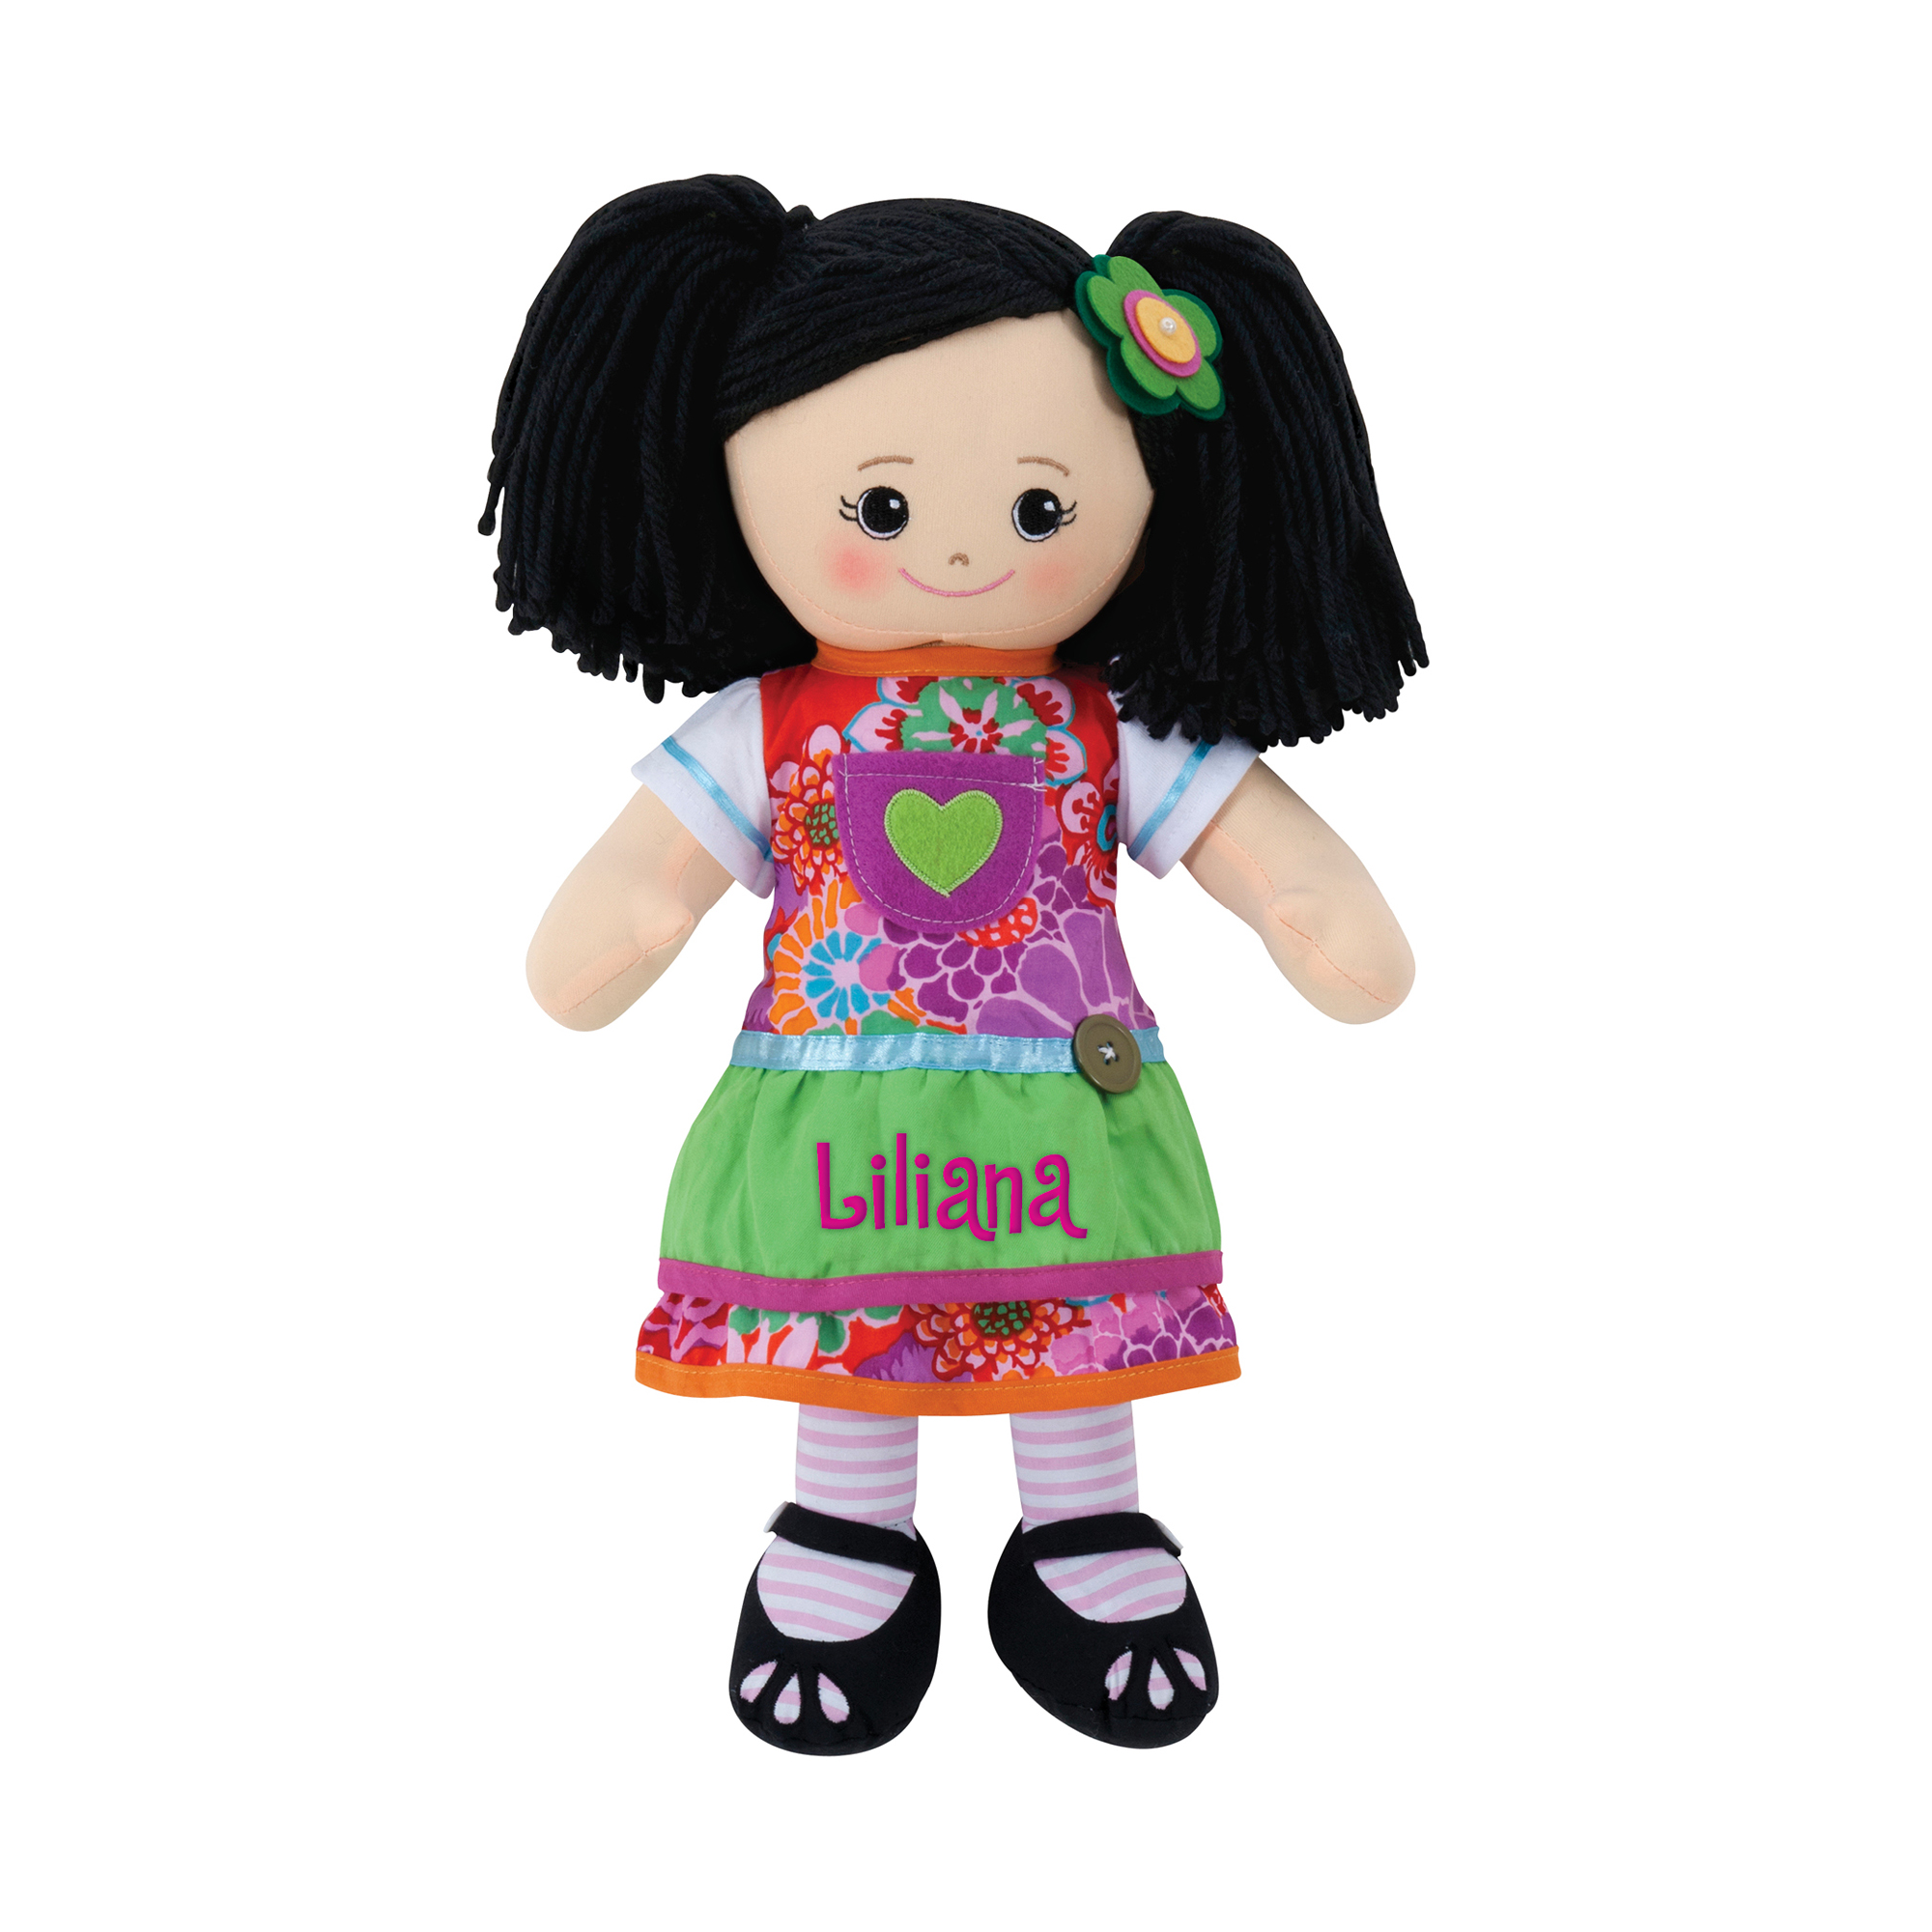 Asian Doll With Green Apron Dress and Hair Clip